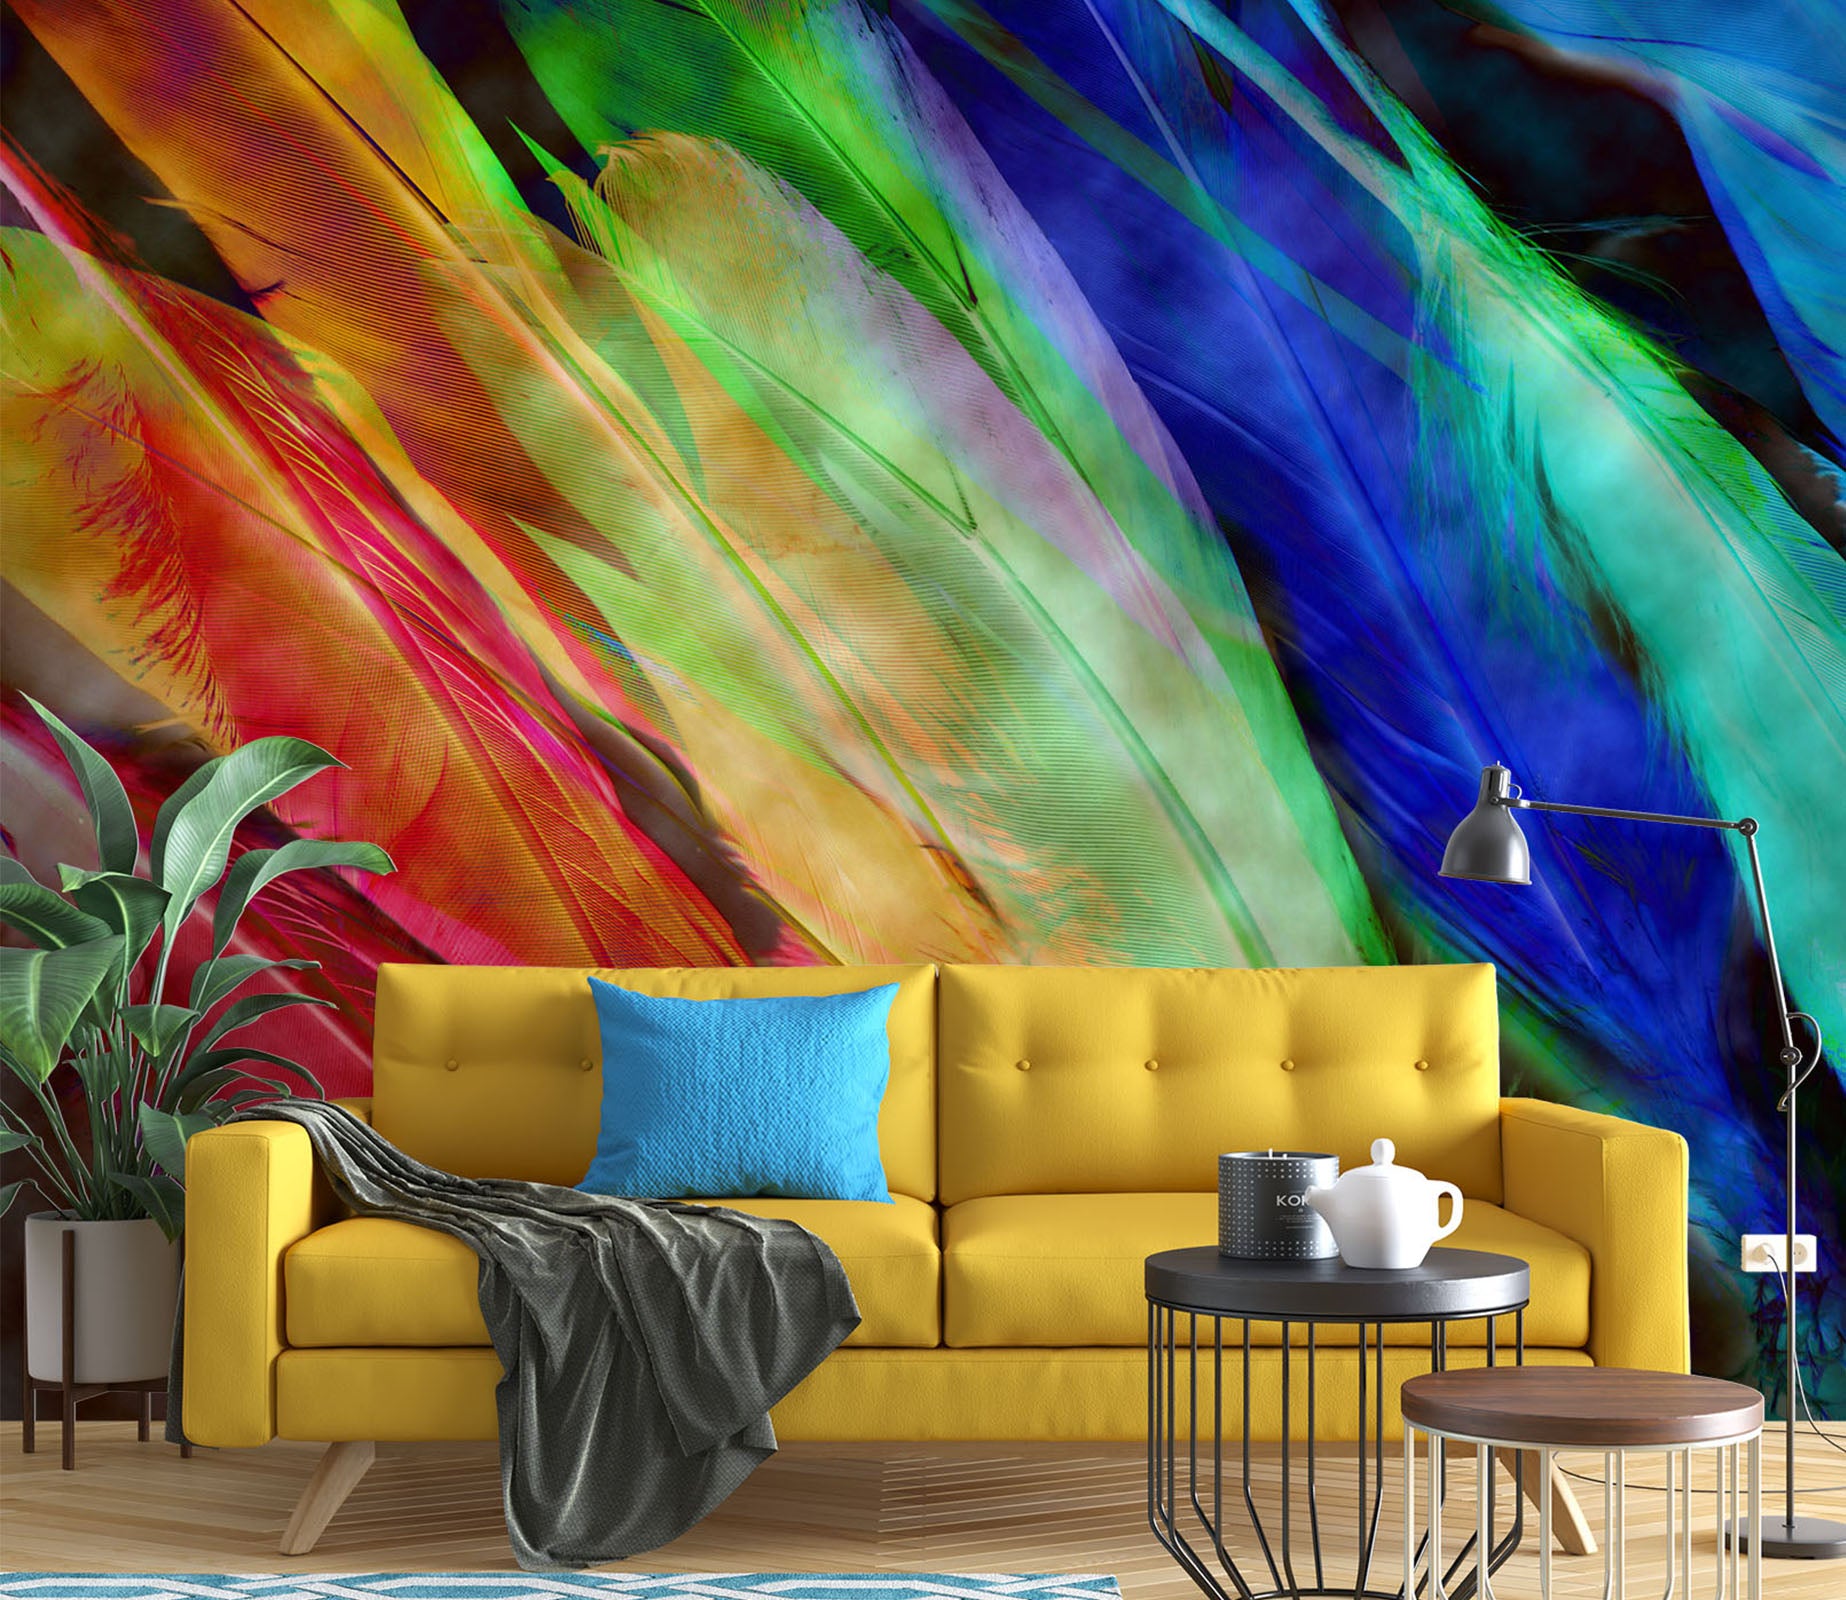 3D Colored Feathers 71073 Shandra Smith Wall Mural Wall Murals